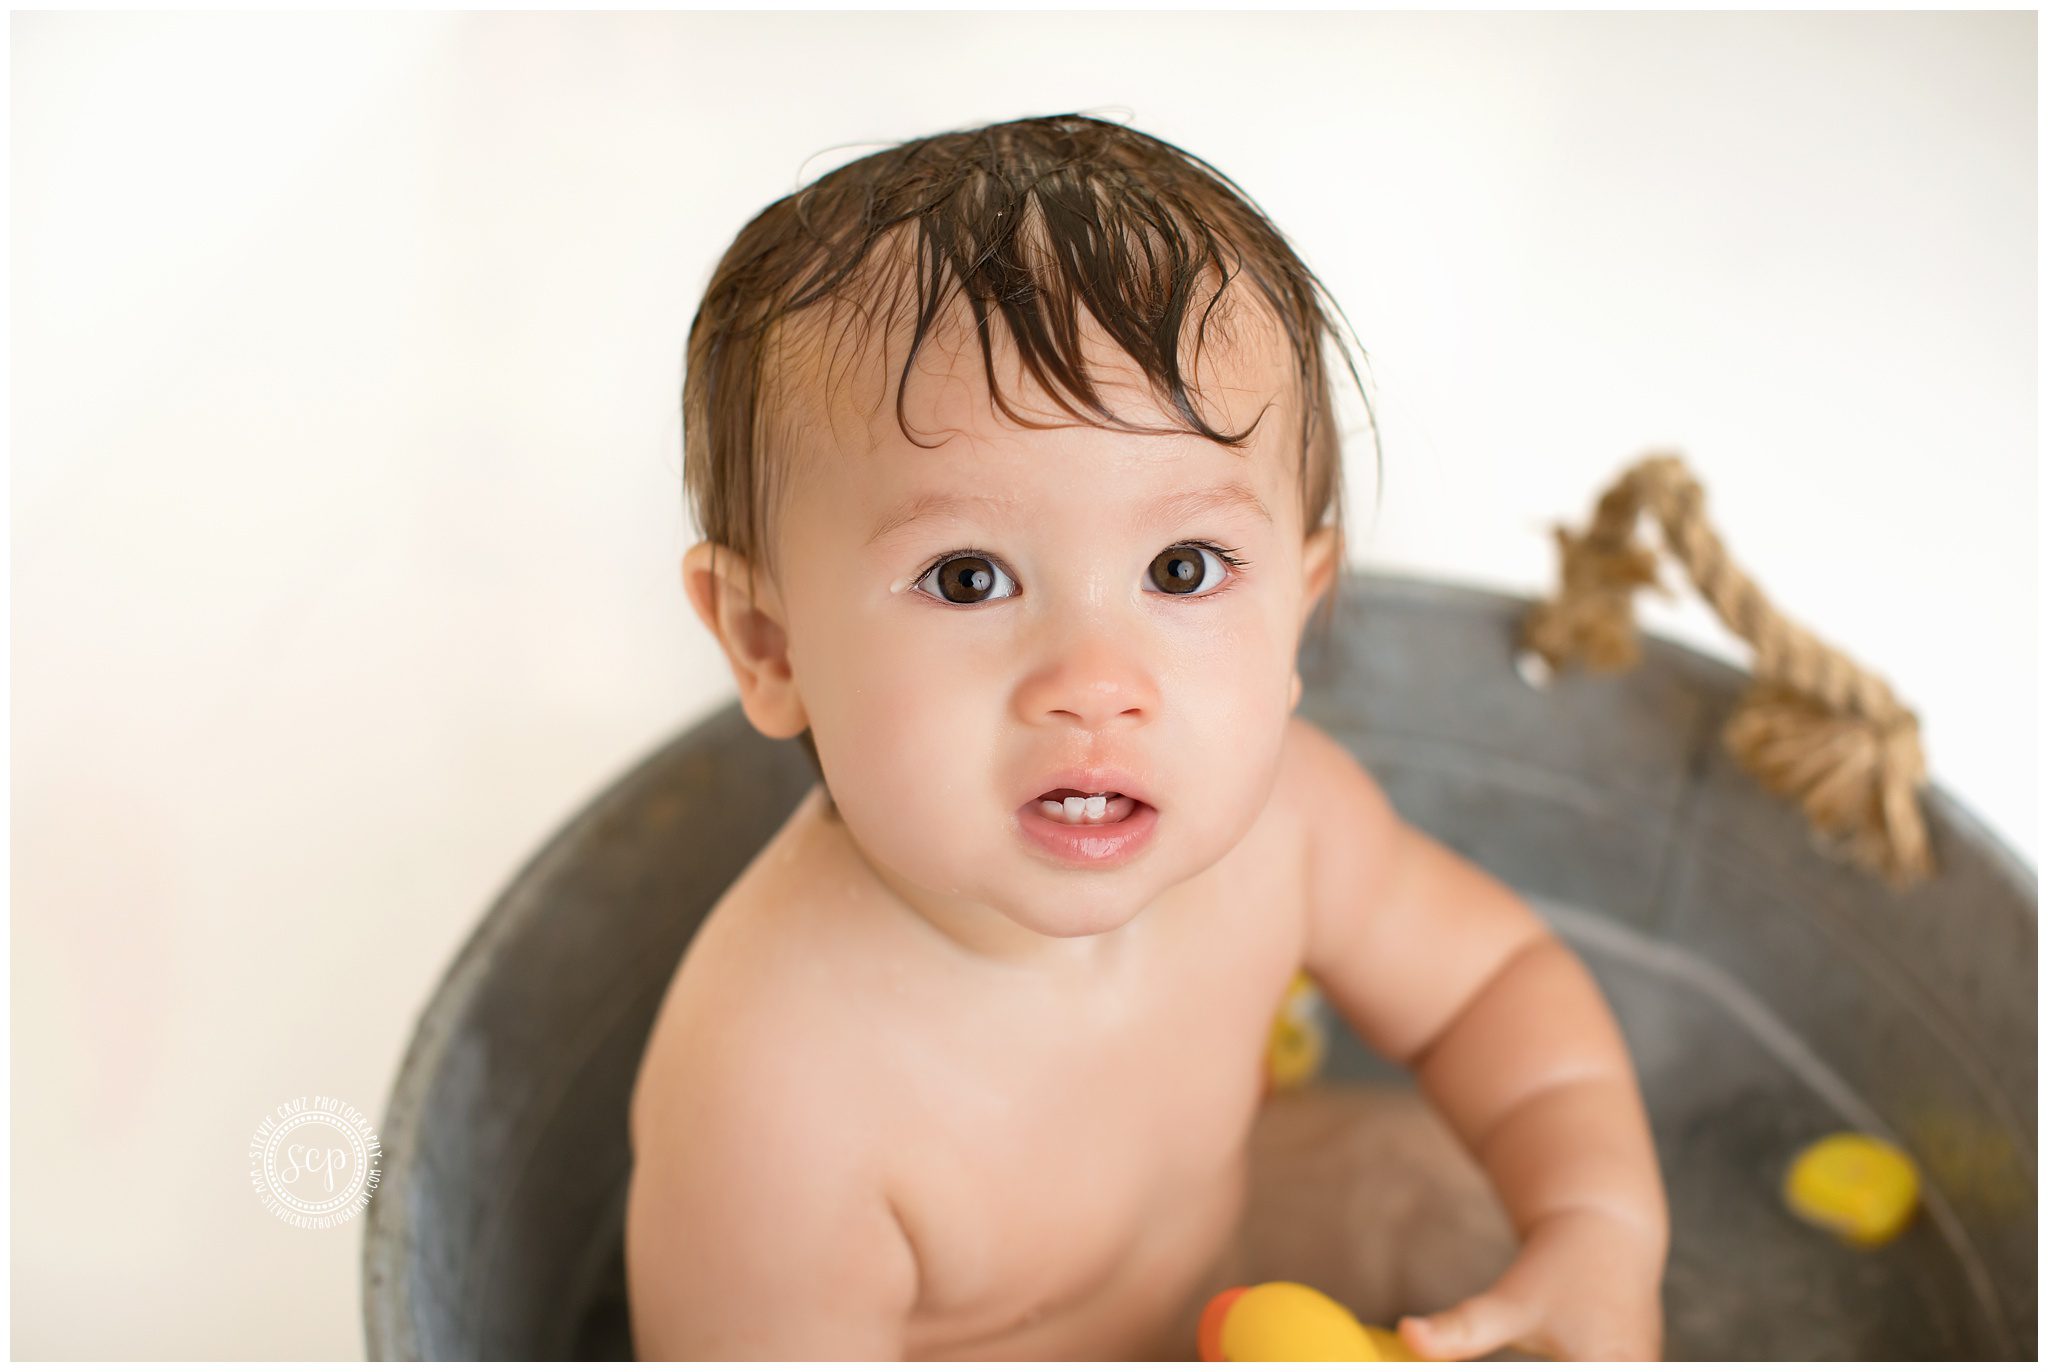 First there was a cake smash then there was bath time, rubber ducky and all. Photos by Stevie Cruz Photography